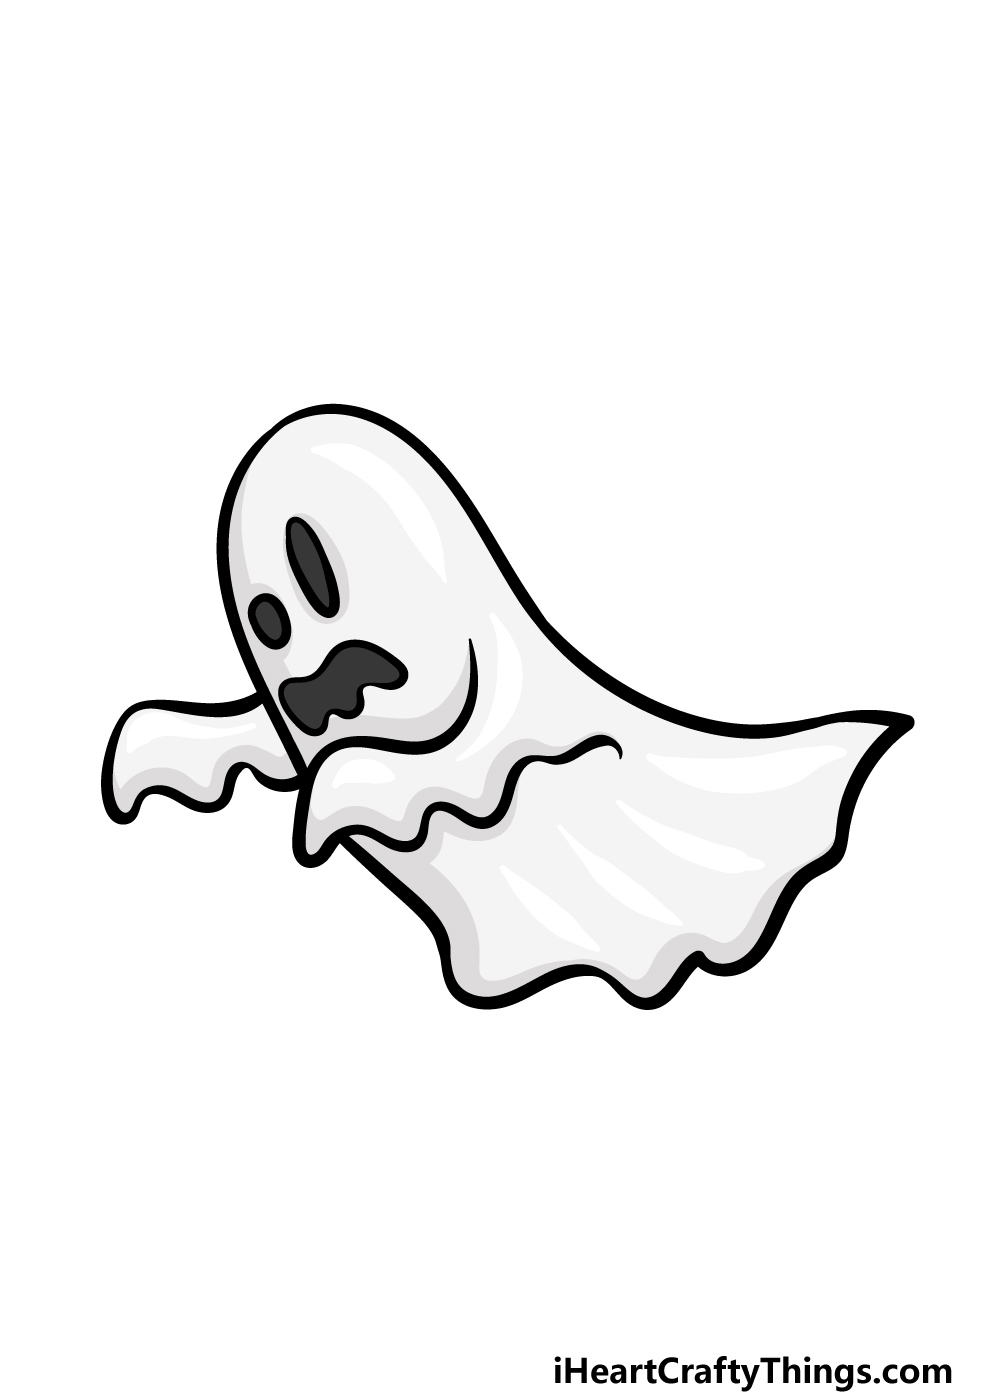 Cartoon Ghost Drawing - How To Draw A Cartoon Ghost Step By Step